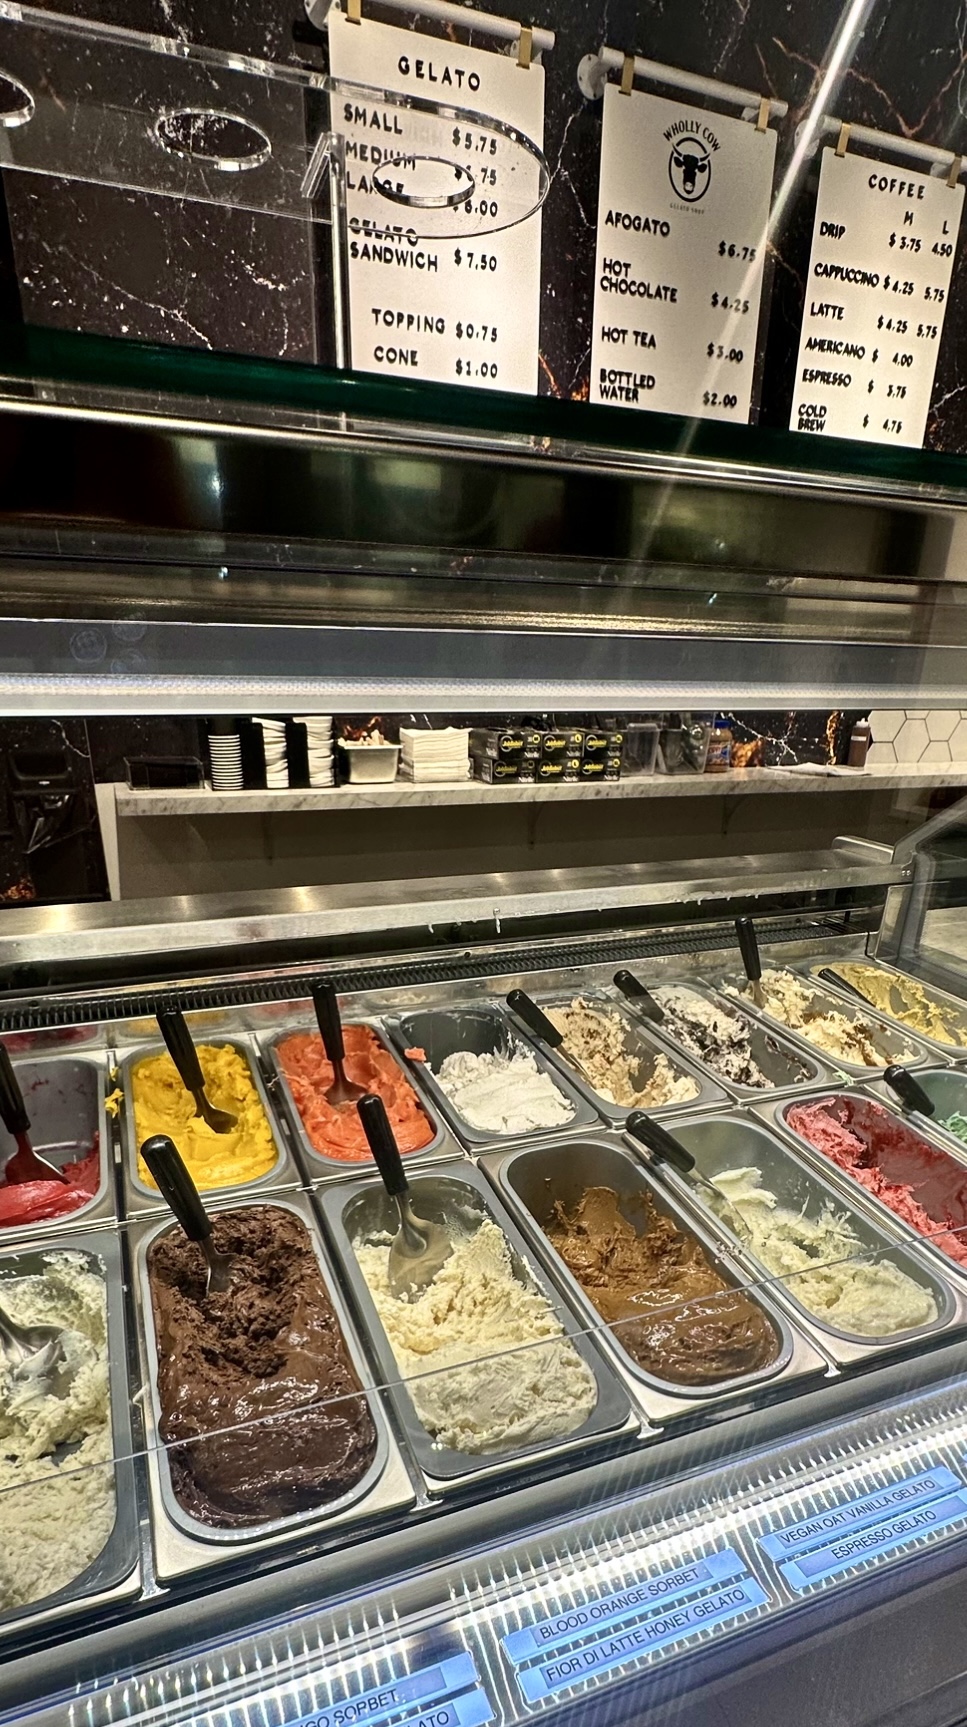 Good Eats and Epis-Wholly cow gelato